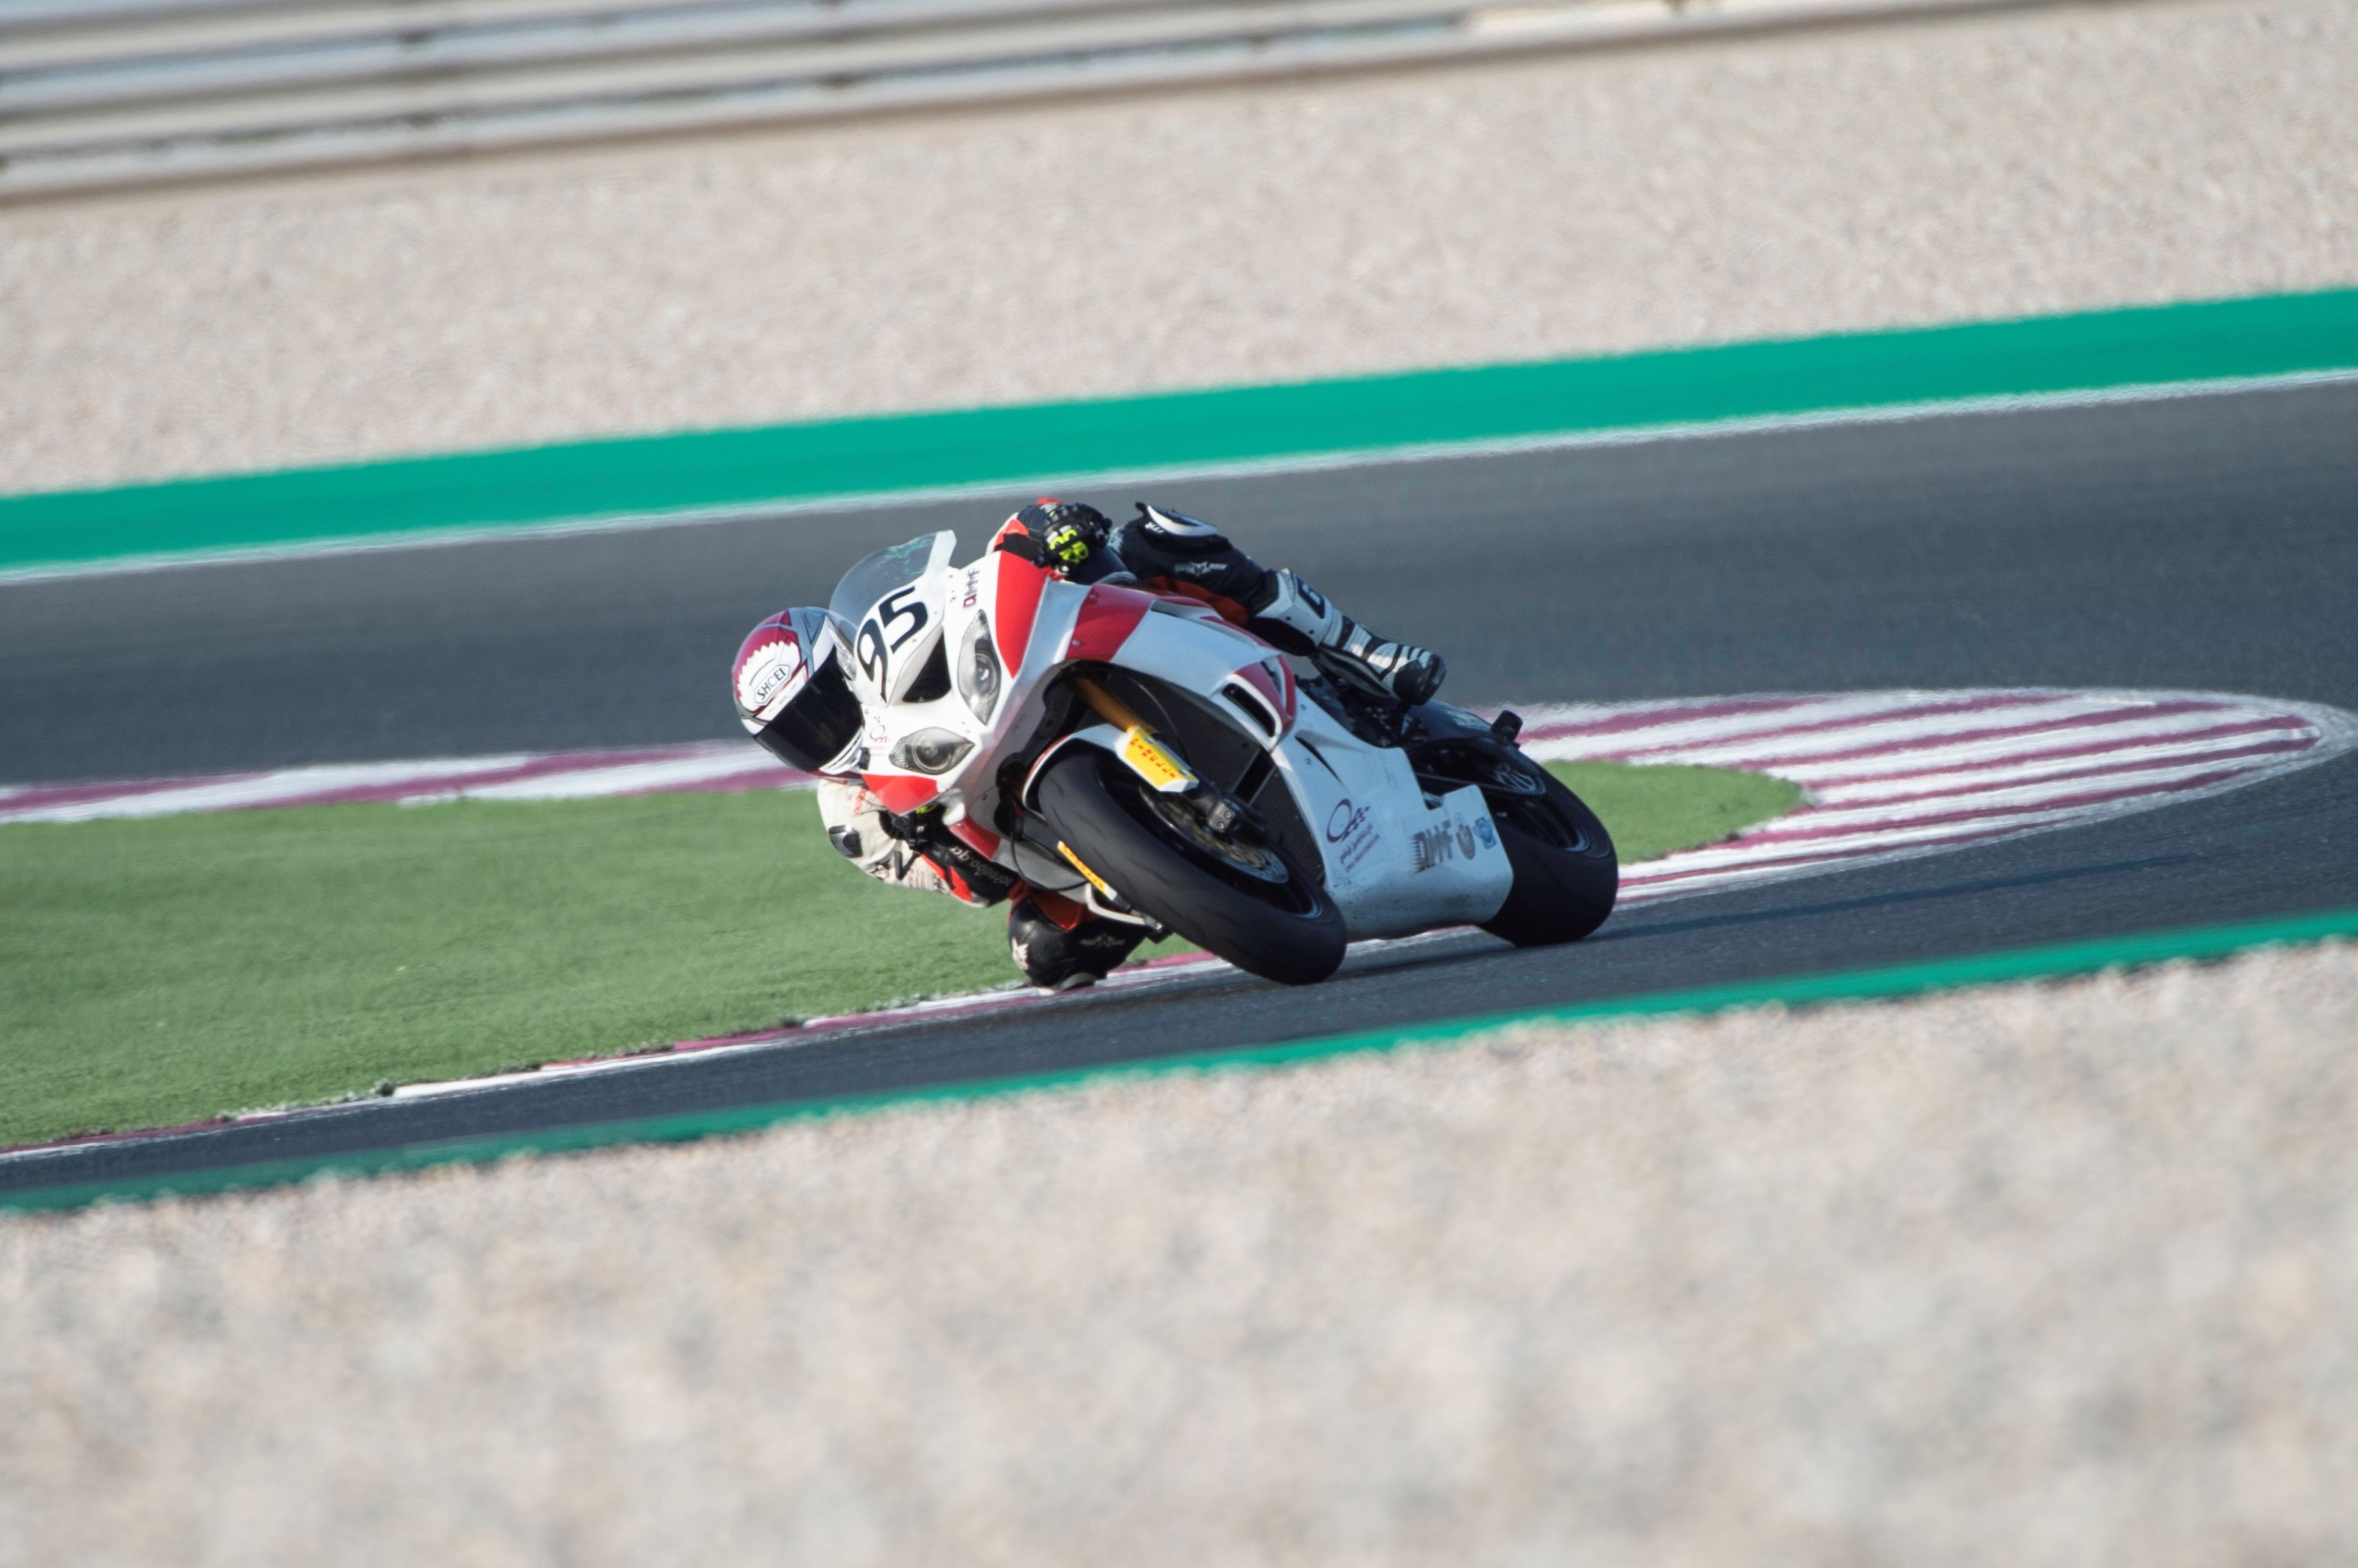 Qatar Superstock 600 starts a new season: Al Naimi fastest at the Official Practice 